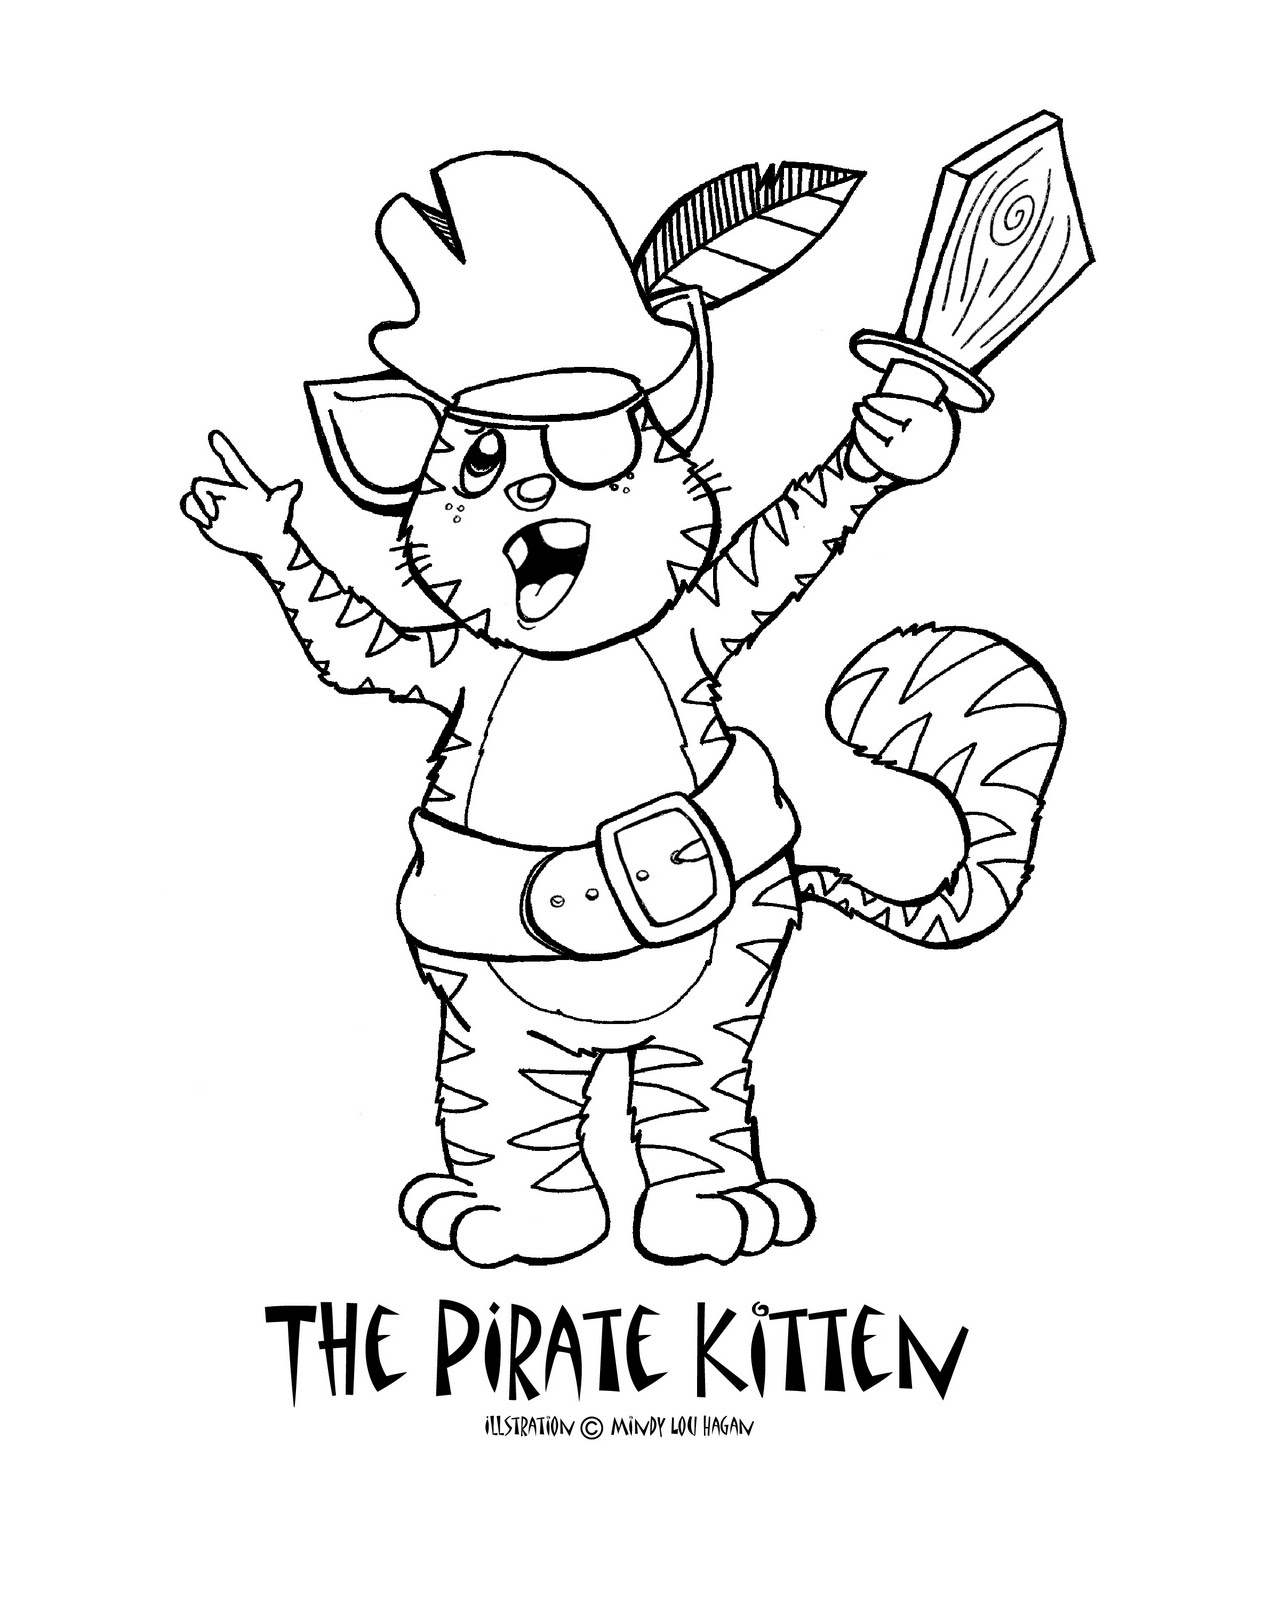 My Art World : The Pirate Kitten - Free Coloring Page!